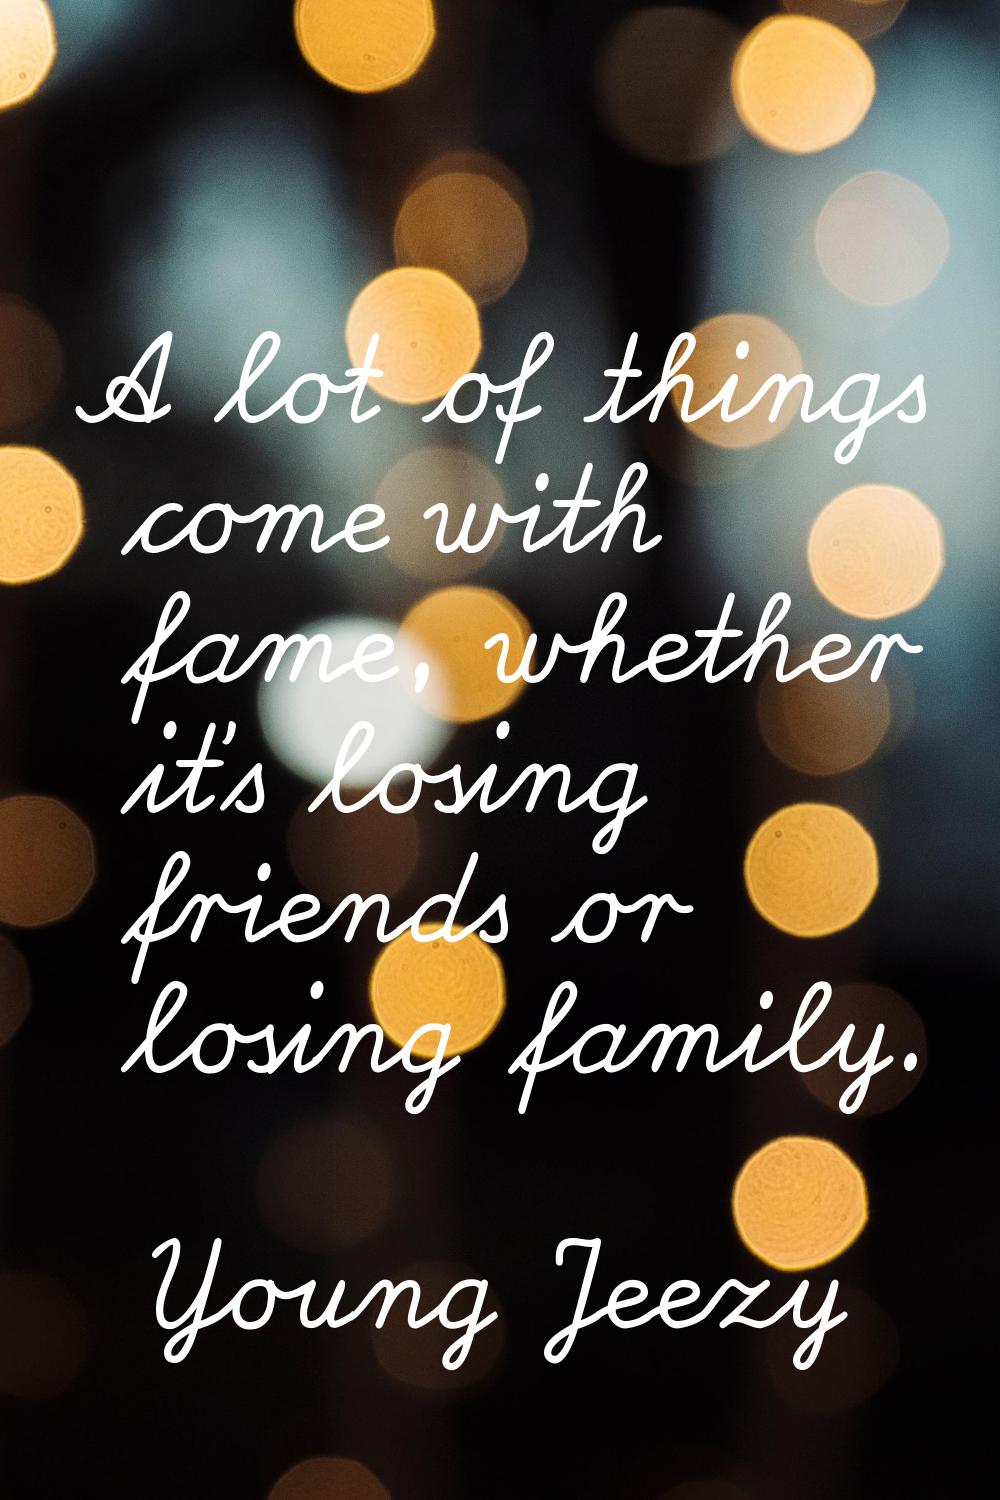 A lot of things come with fame, whether it's losing friends or losing family.